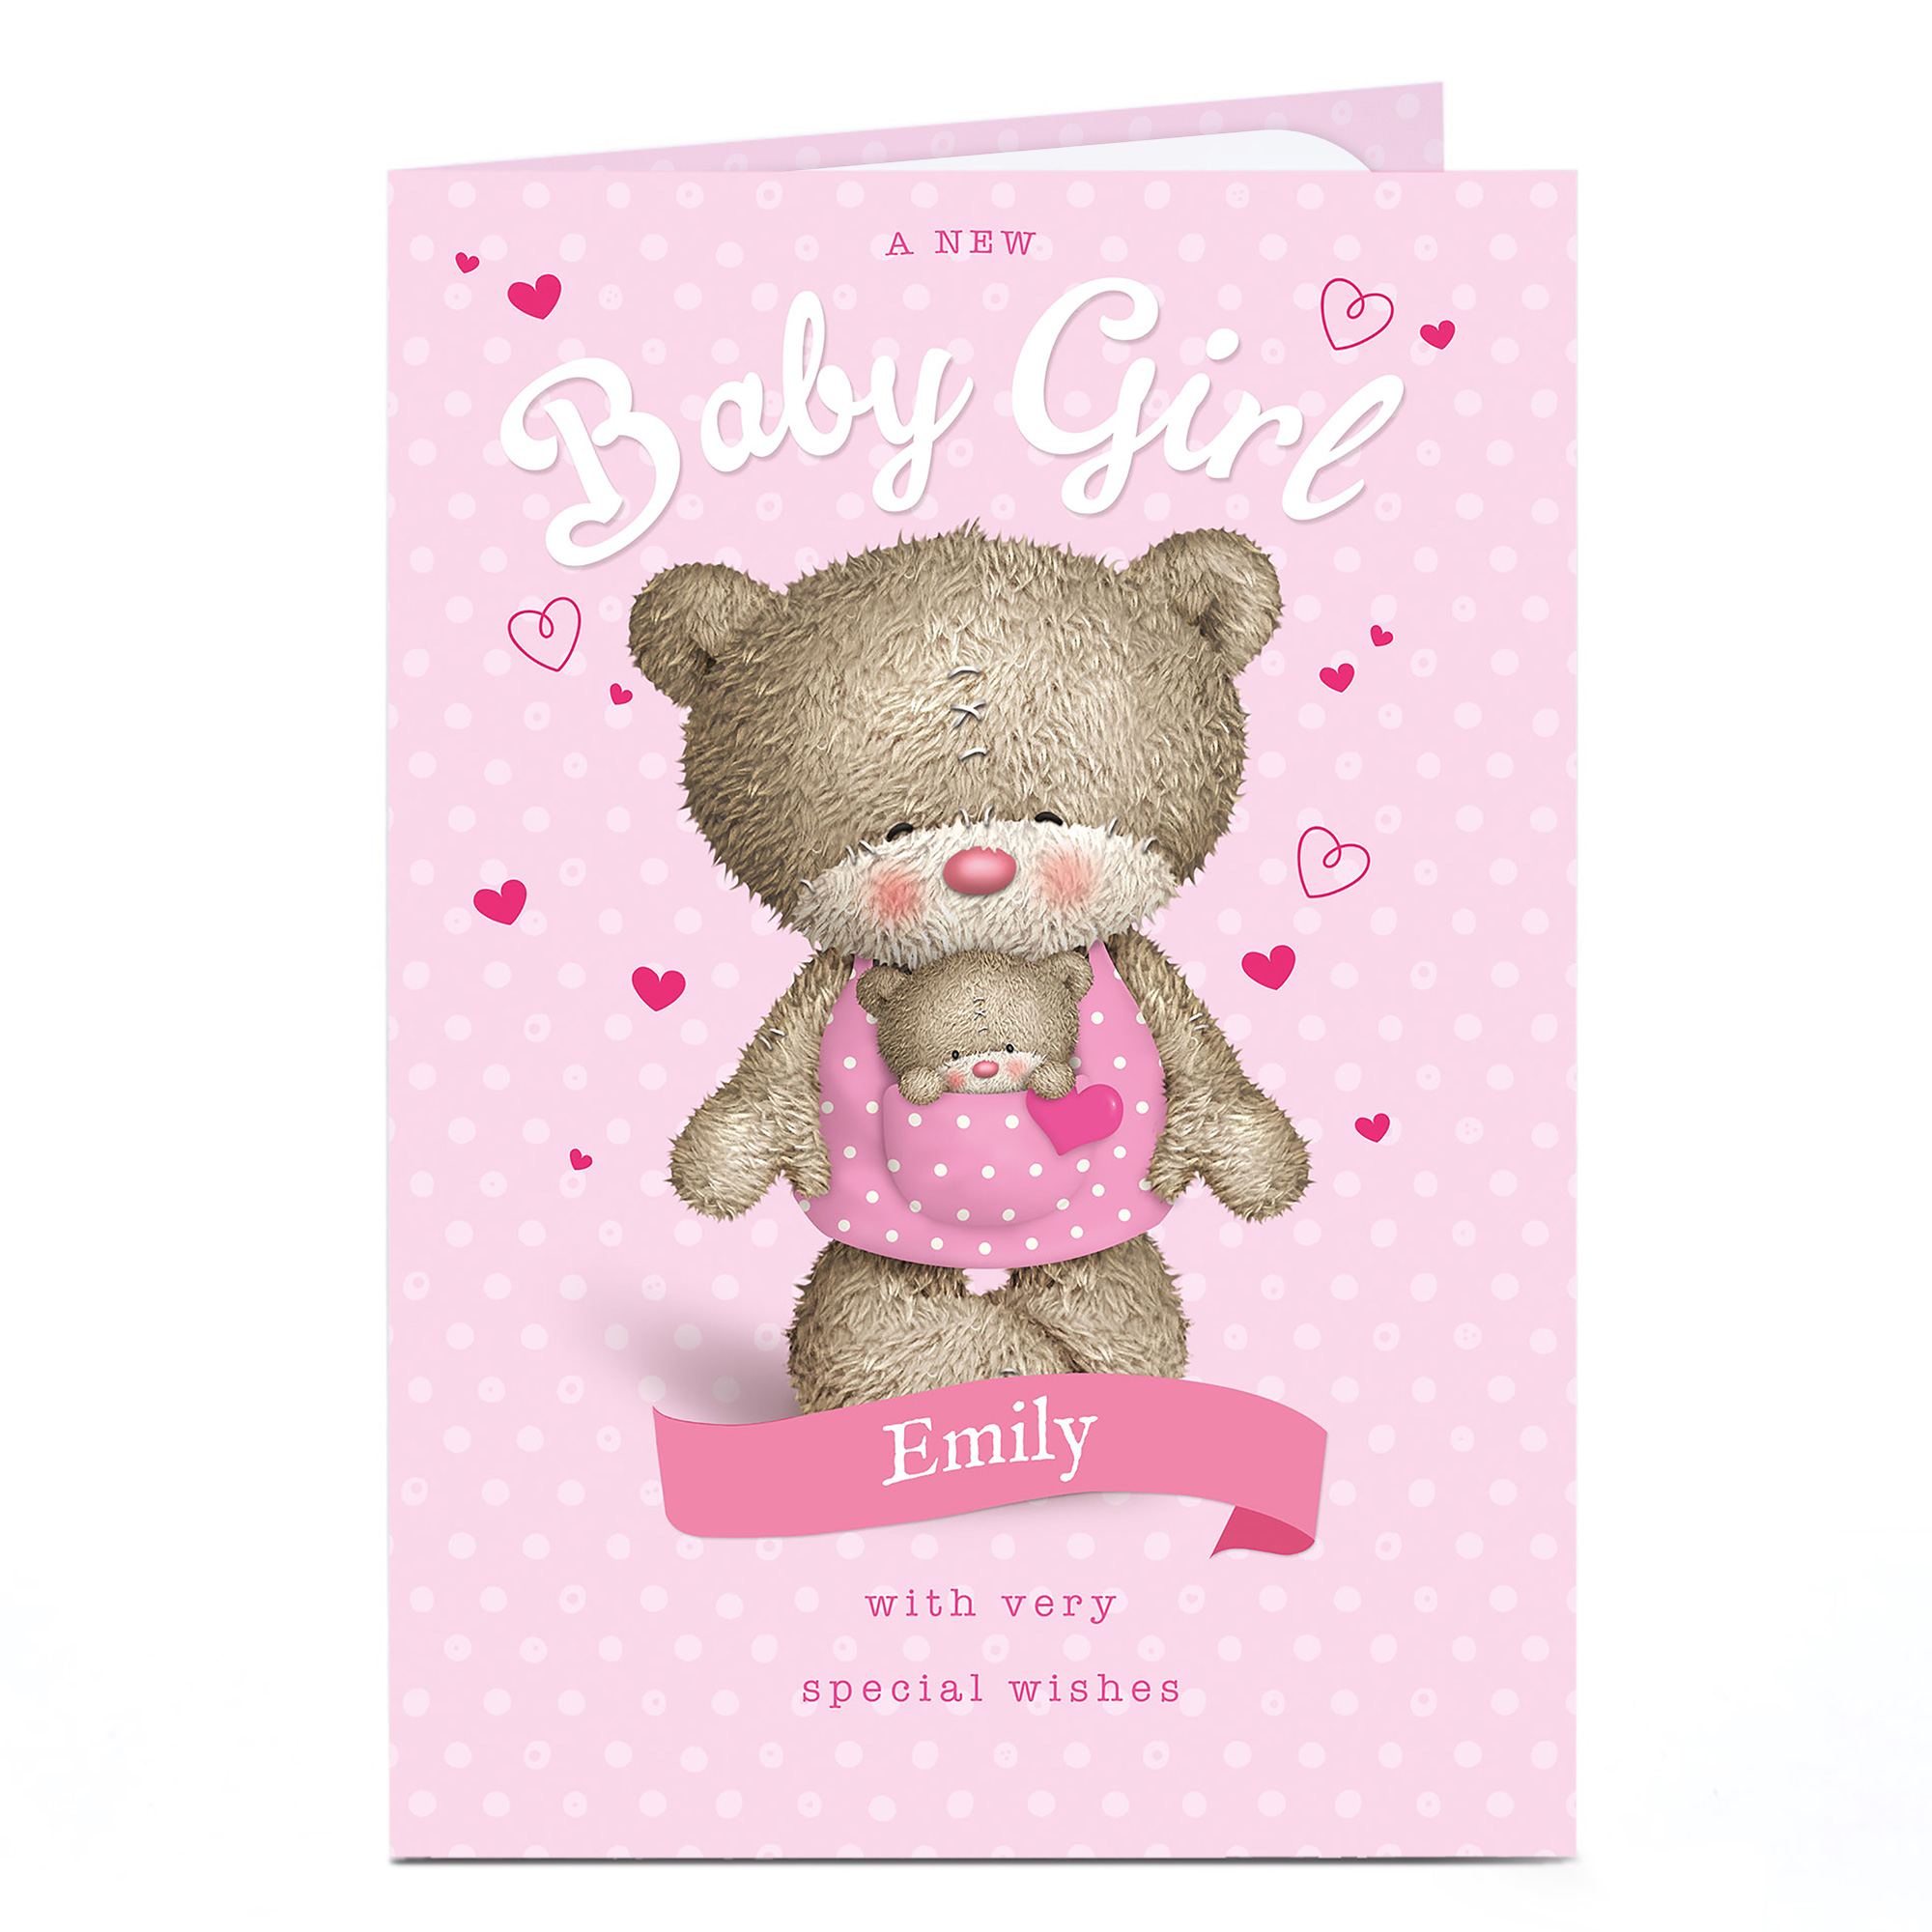 Personalised Hugs New Baby Card - A New Baby Girl